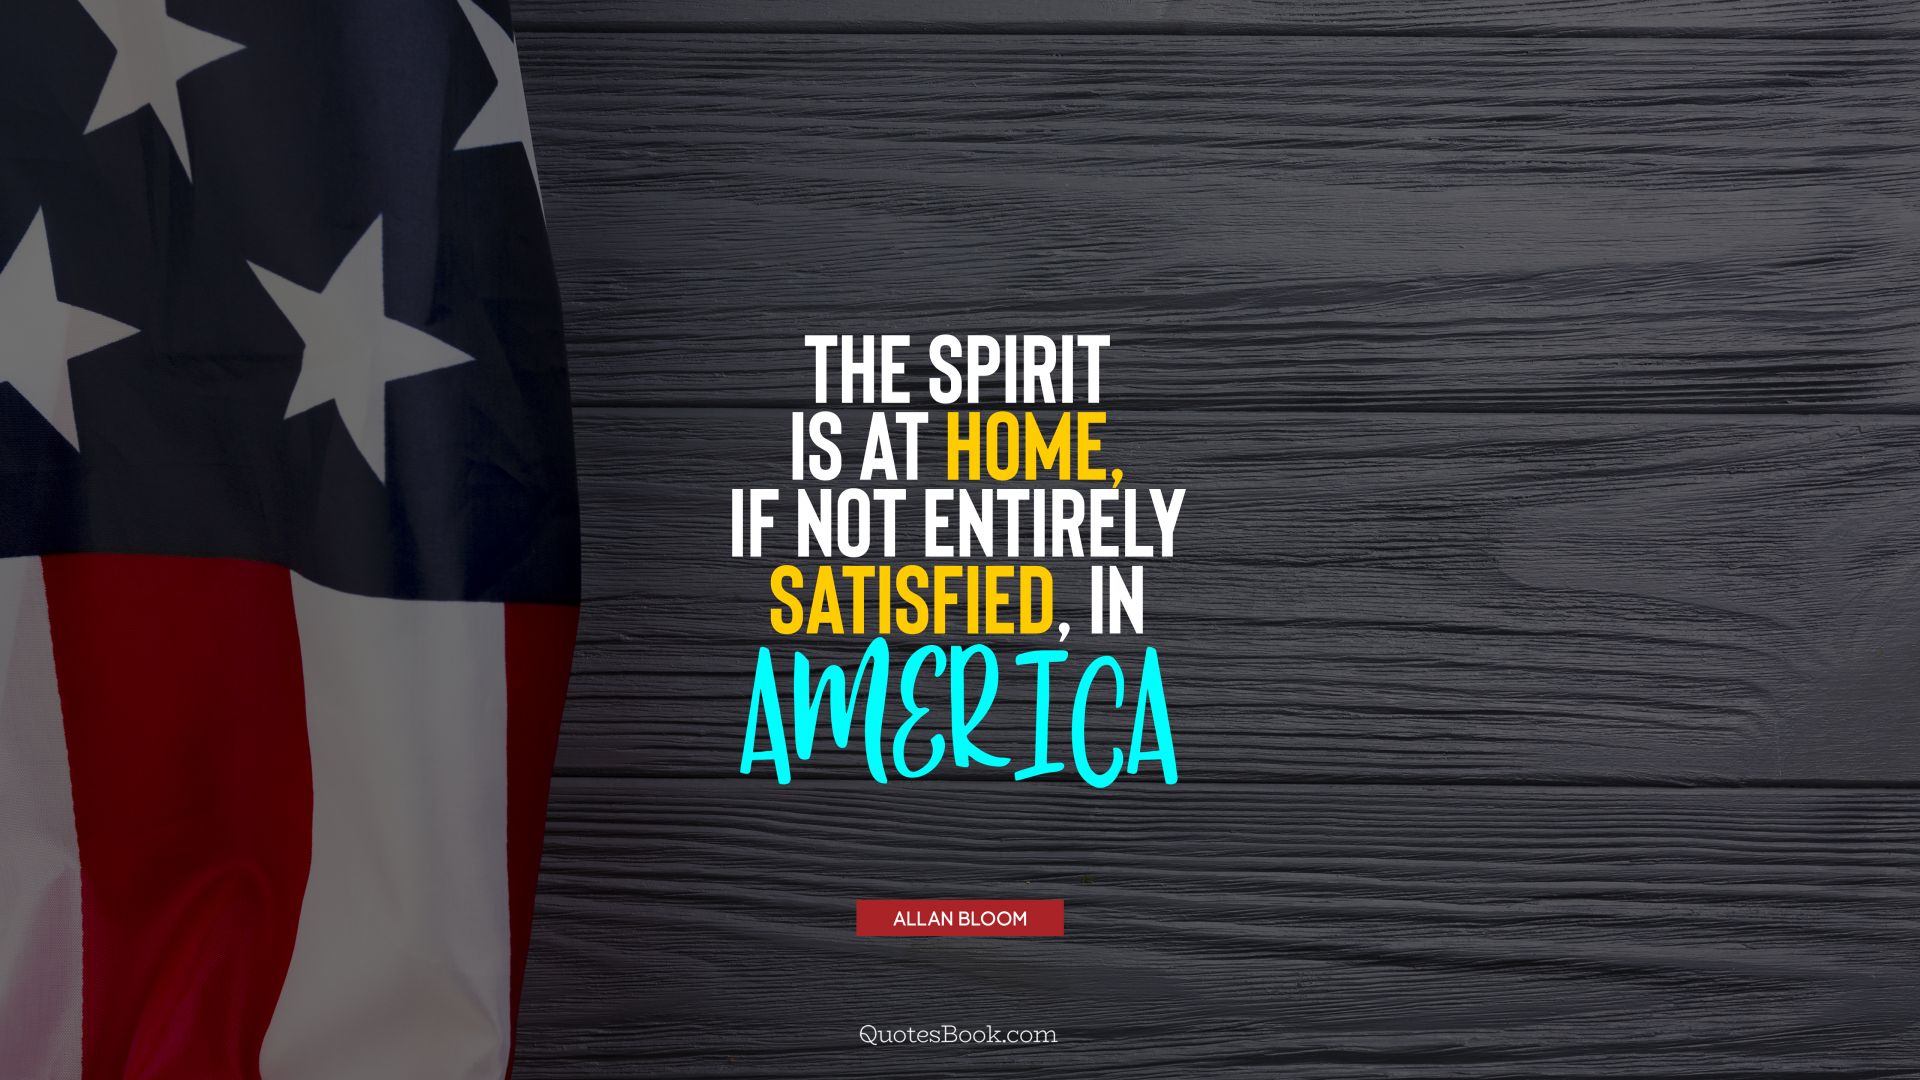 The spirit is at home, if not entirely satisfied, in America. - Quote by Allan Bloom